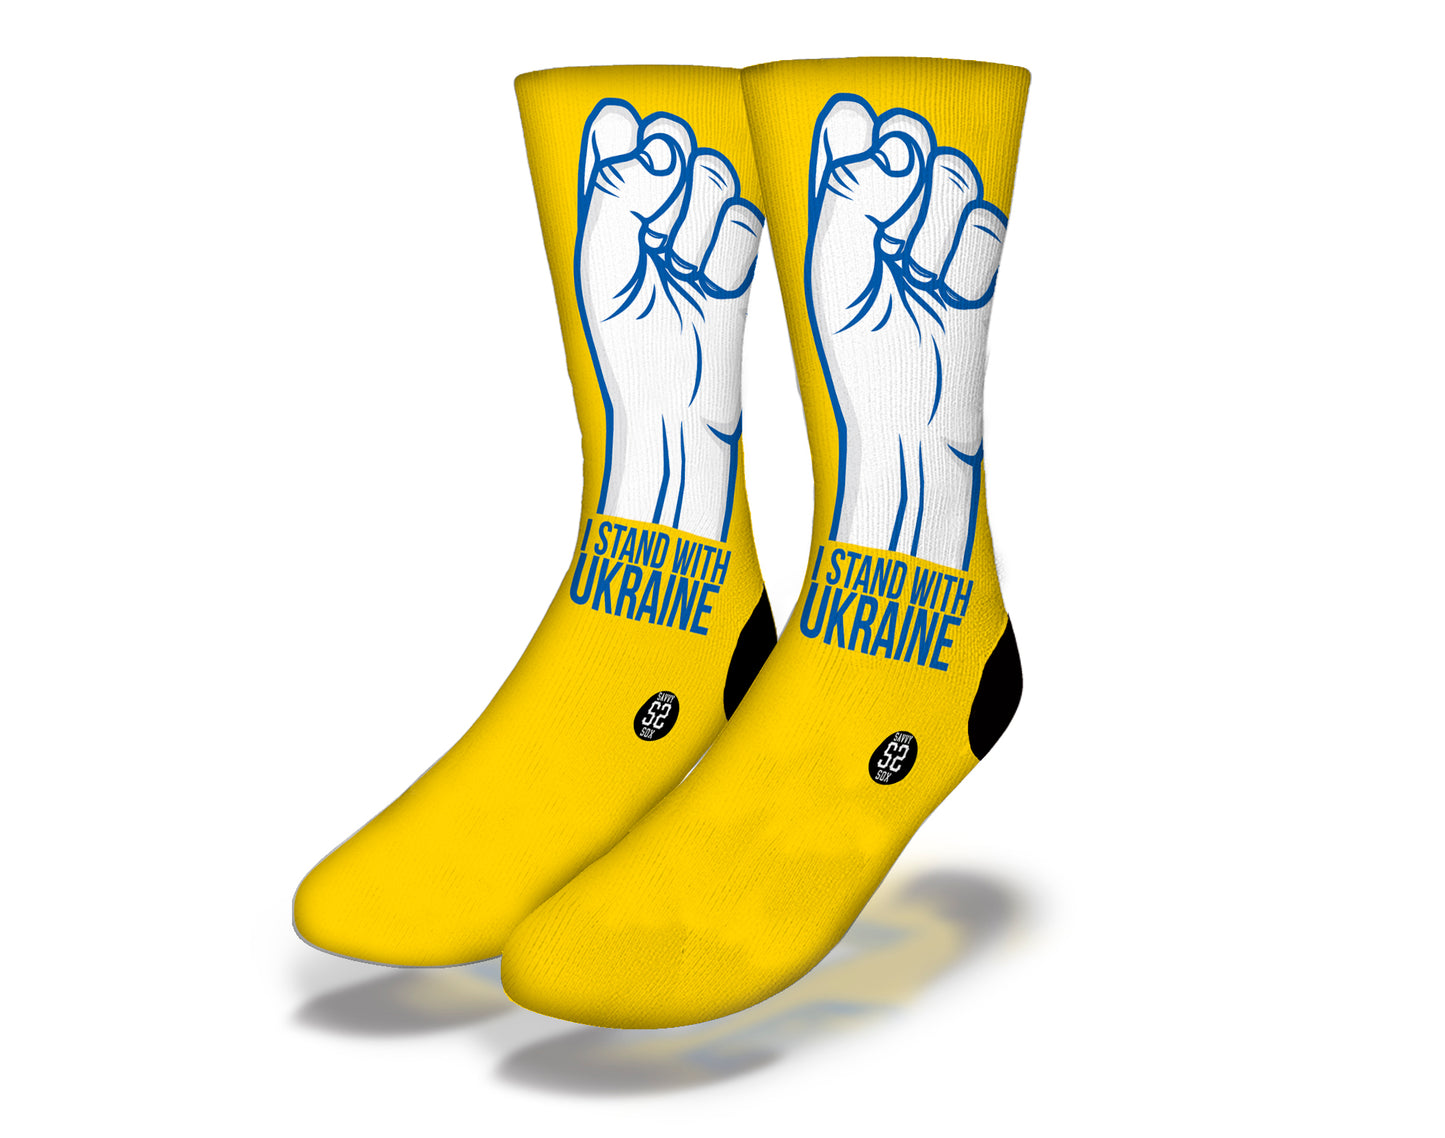 I STAND WITH UKRAINE Social Cause Socks